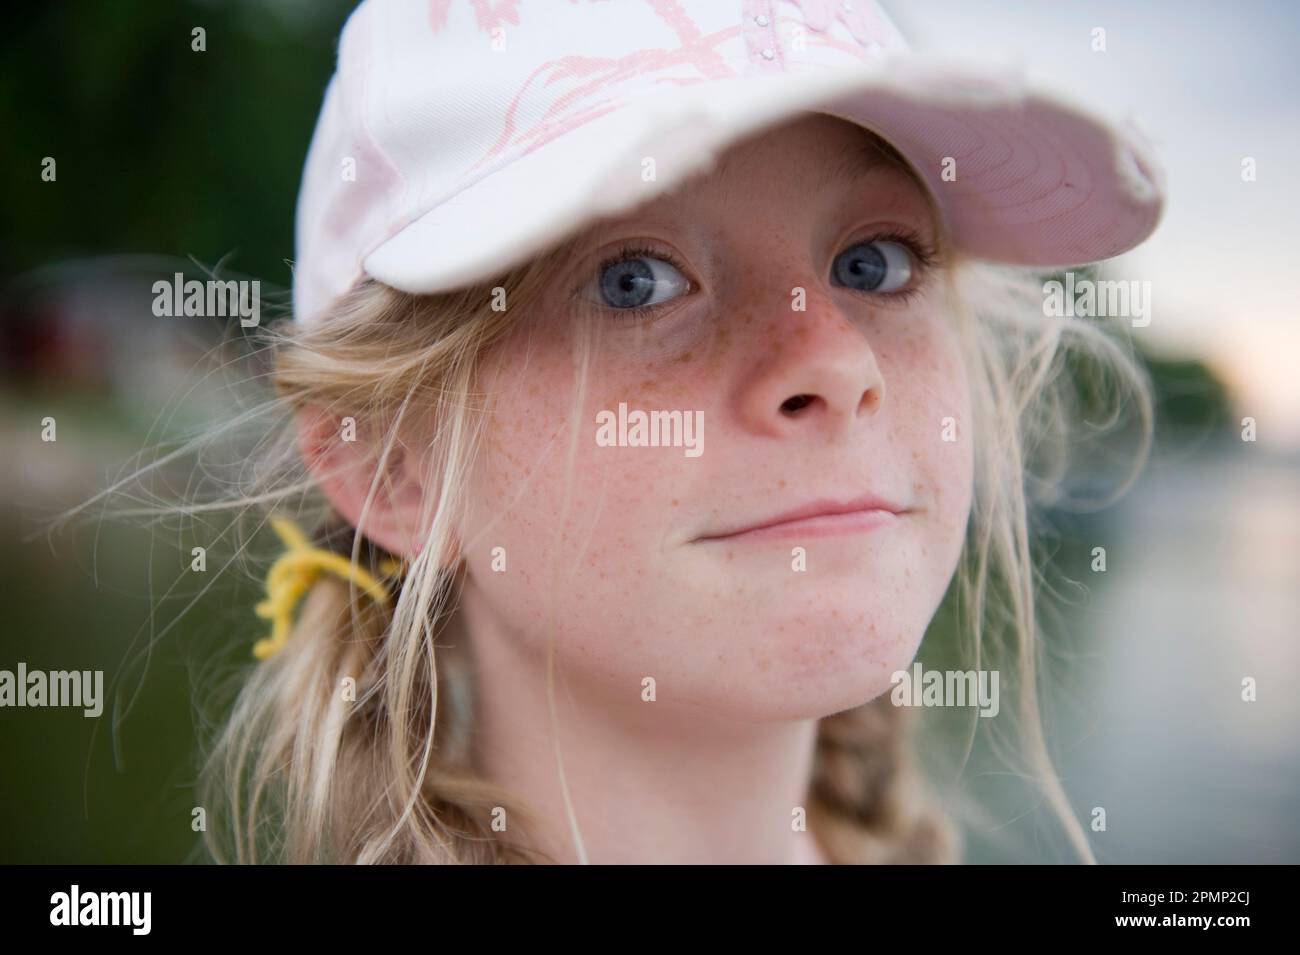 Close-up portrait of a young girl with freckles and blue eyes; Walker, Minnesota, United States of America Stock Photo